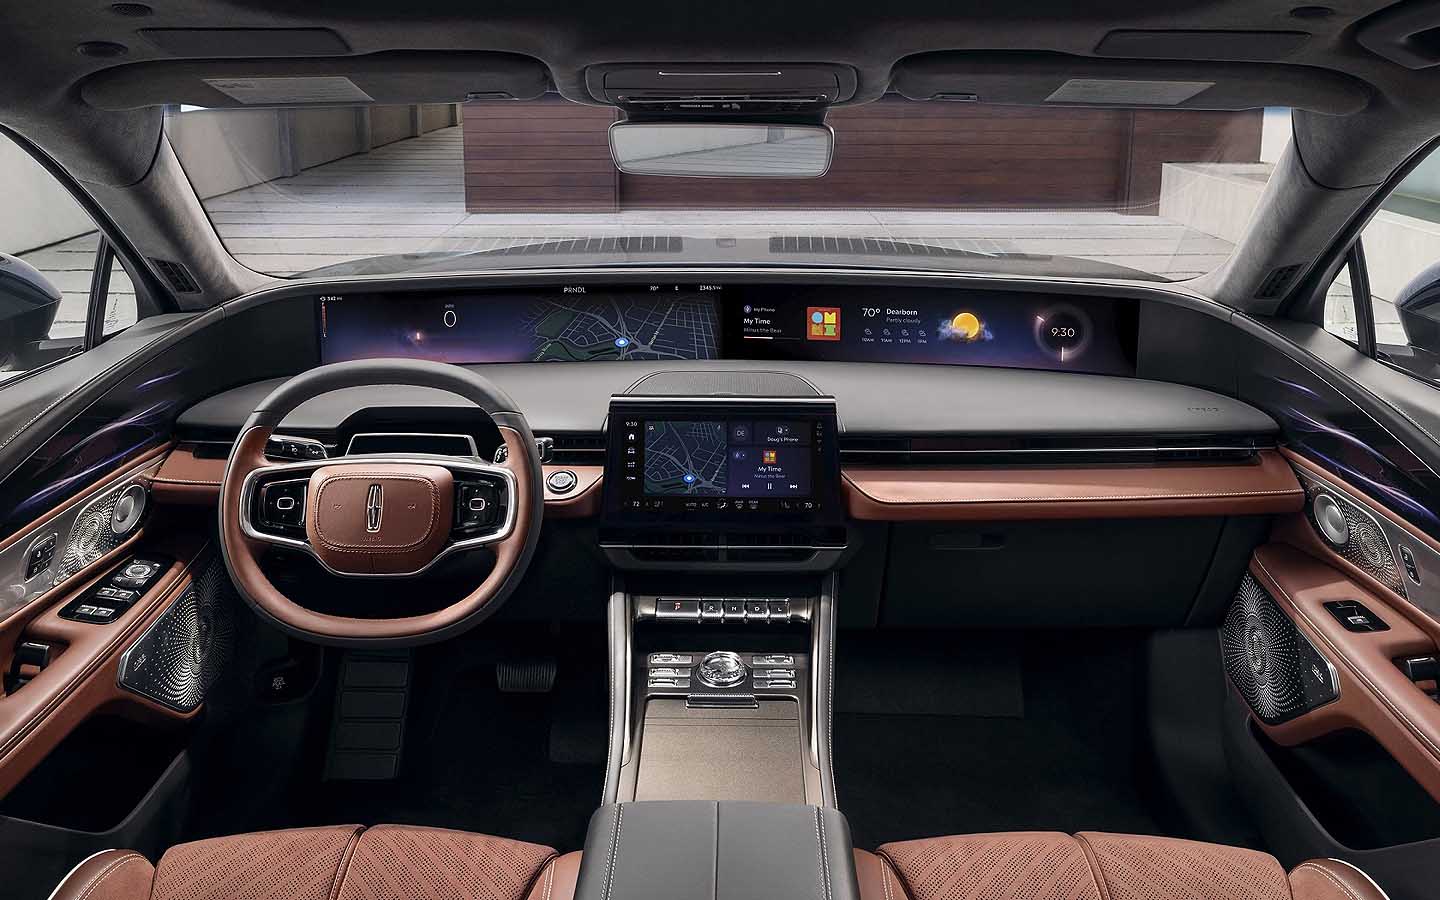 the luxury SUV comes with a 11.1 inch infotainment screen